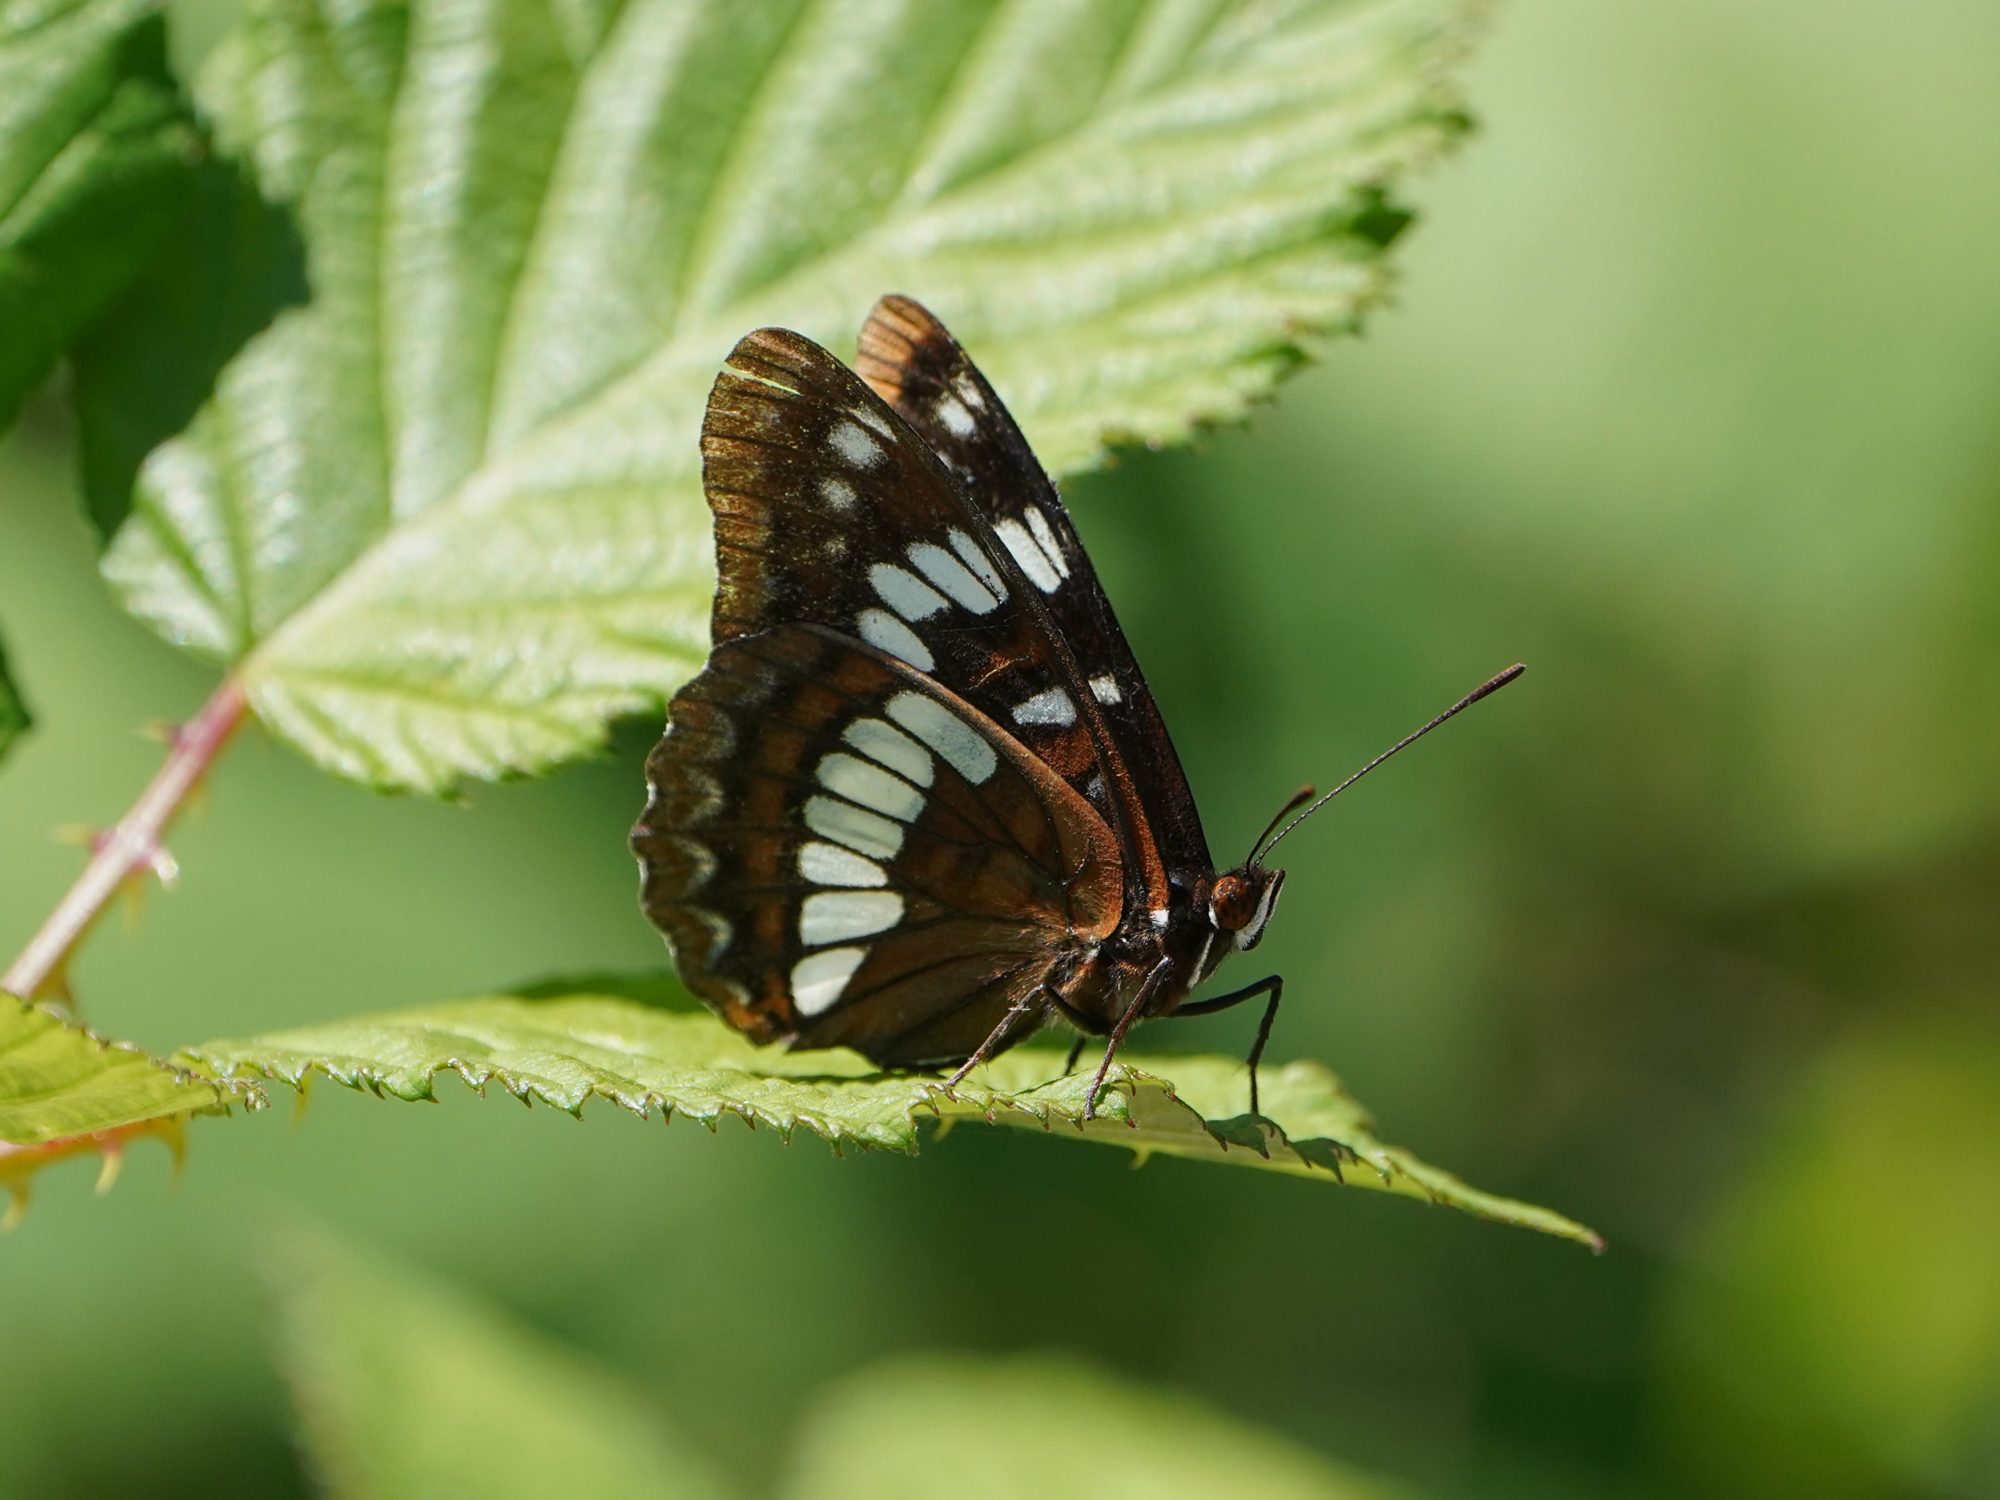 A Lorquin's Admiral butterfly (mostly dark brown & orange, with a row of white patches) on a green leaf